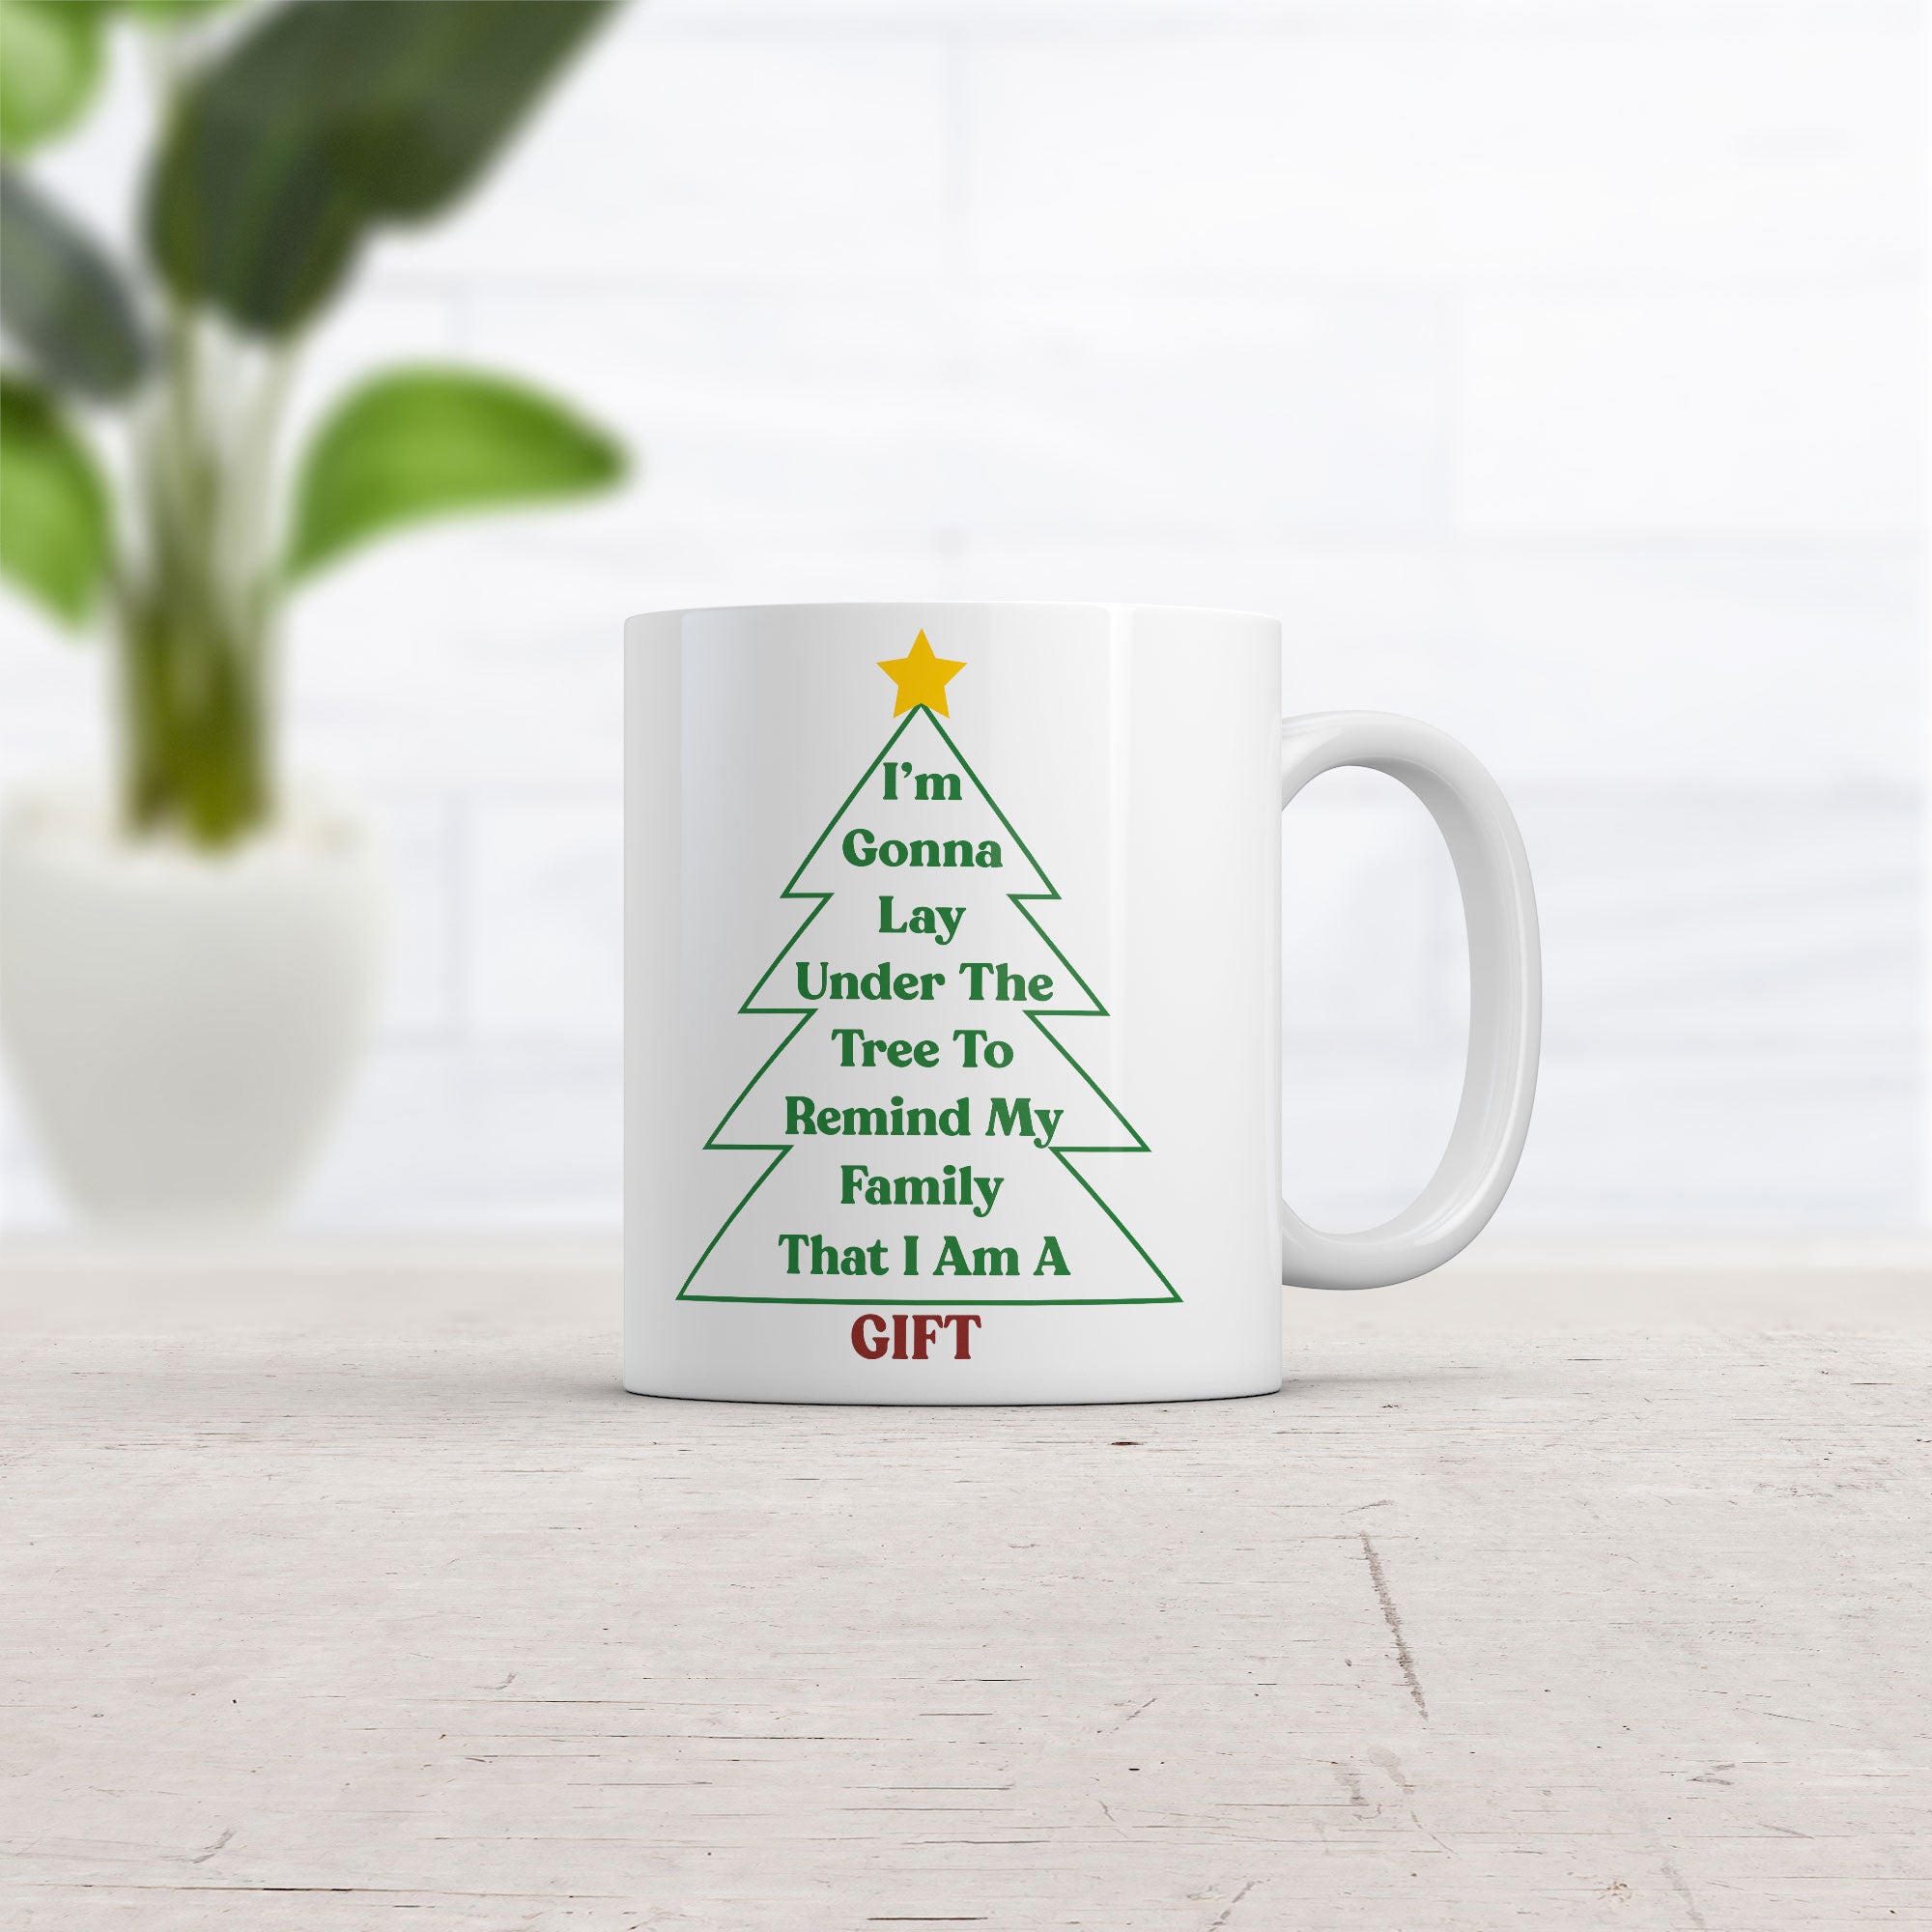 Funny White Im Gonna Lay Under The Tree To Remind My Family That I Am A Gift Coffee Mug Nerdy Christmas sarcastic Tee